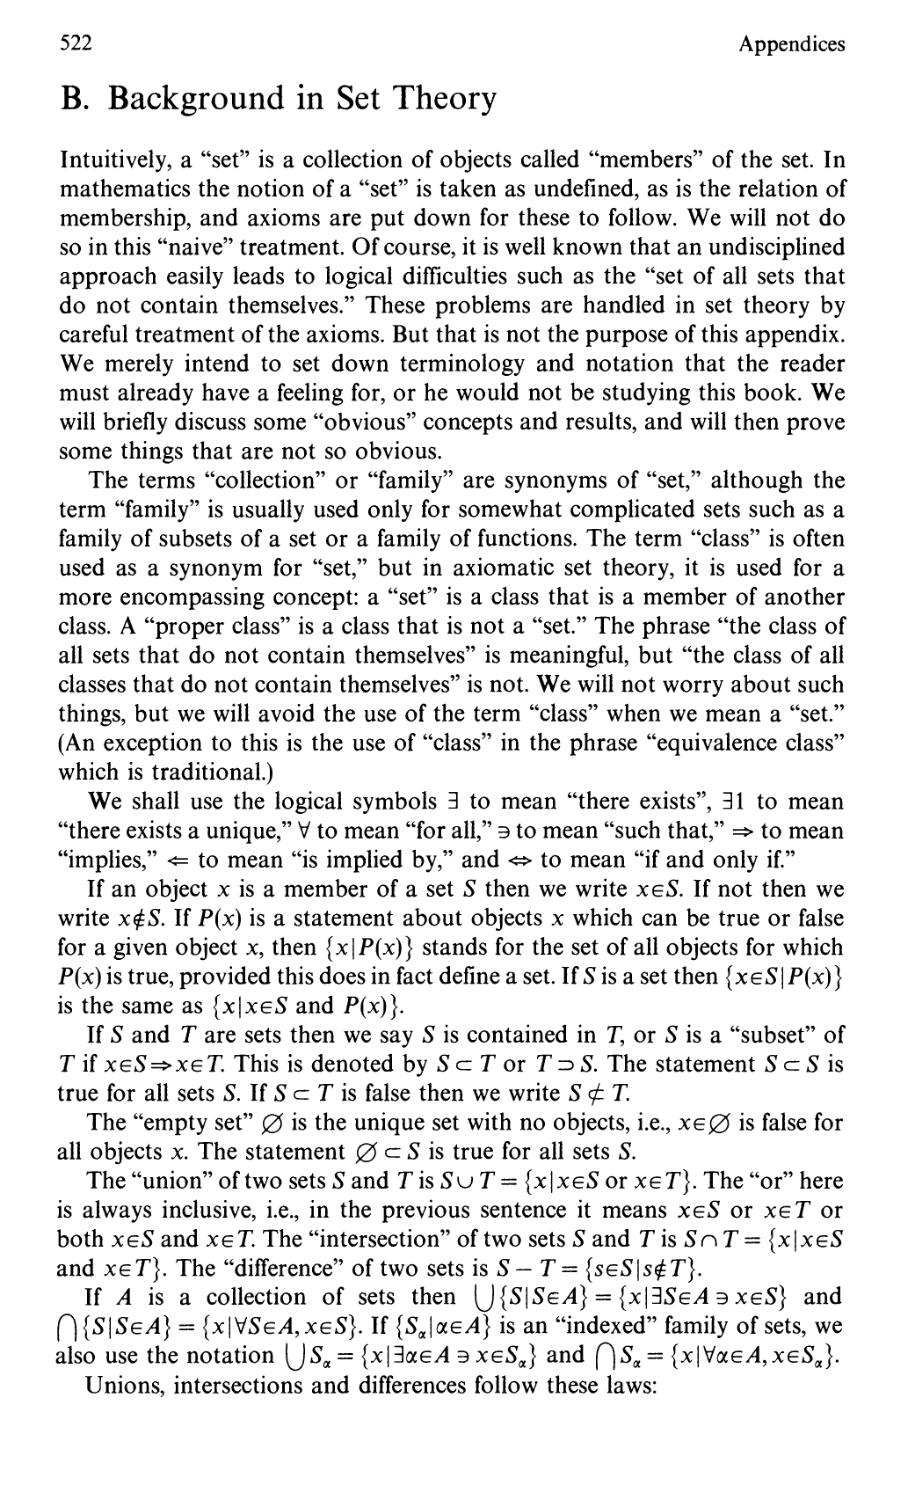 App. B. Background in Set Theory